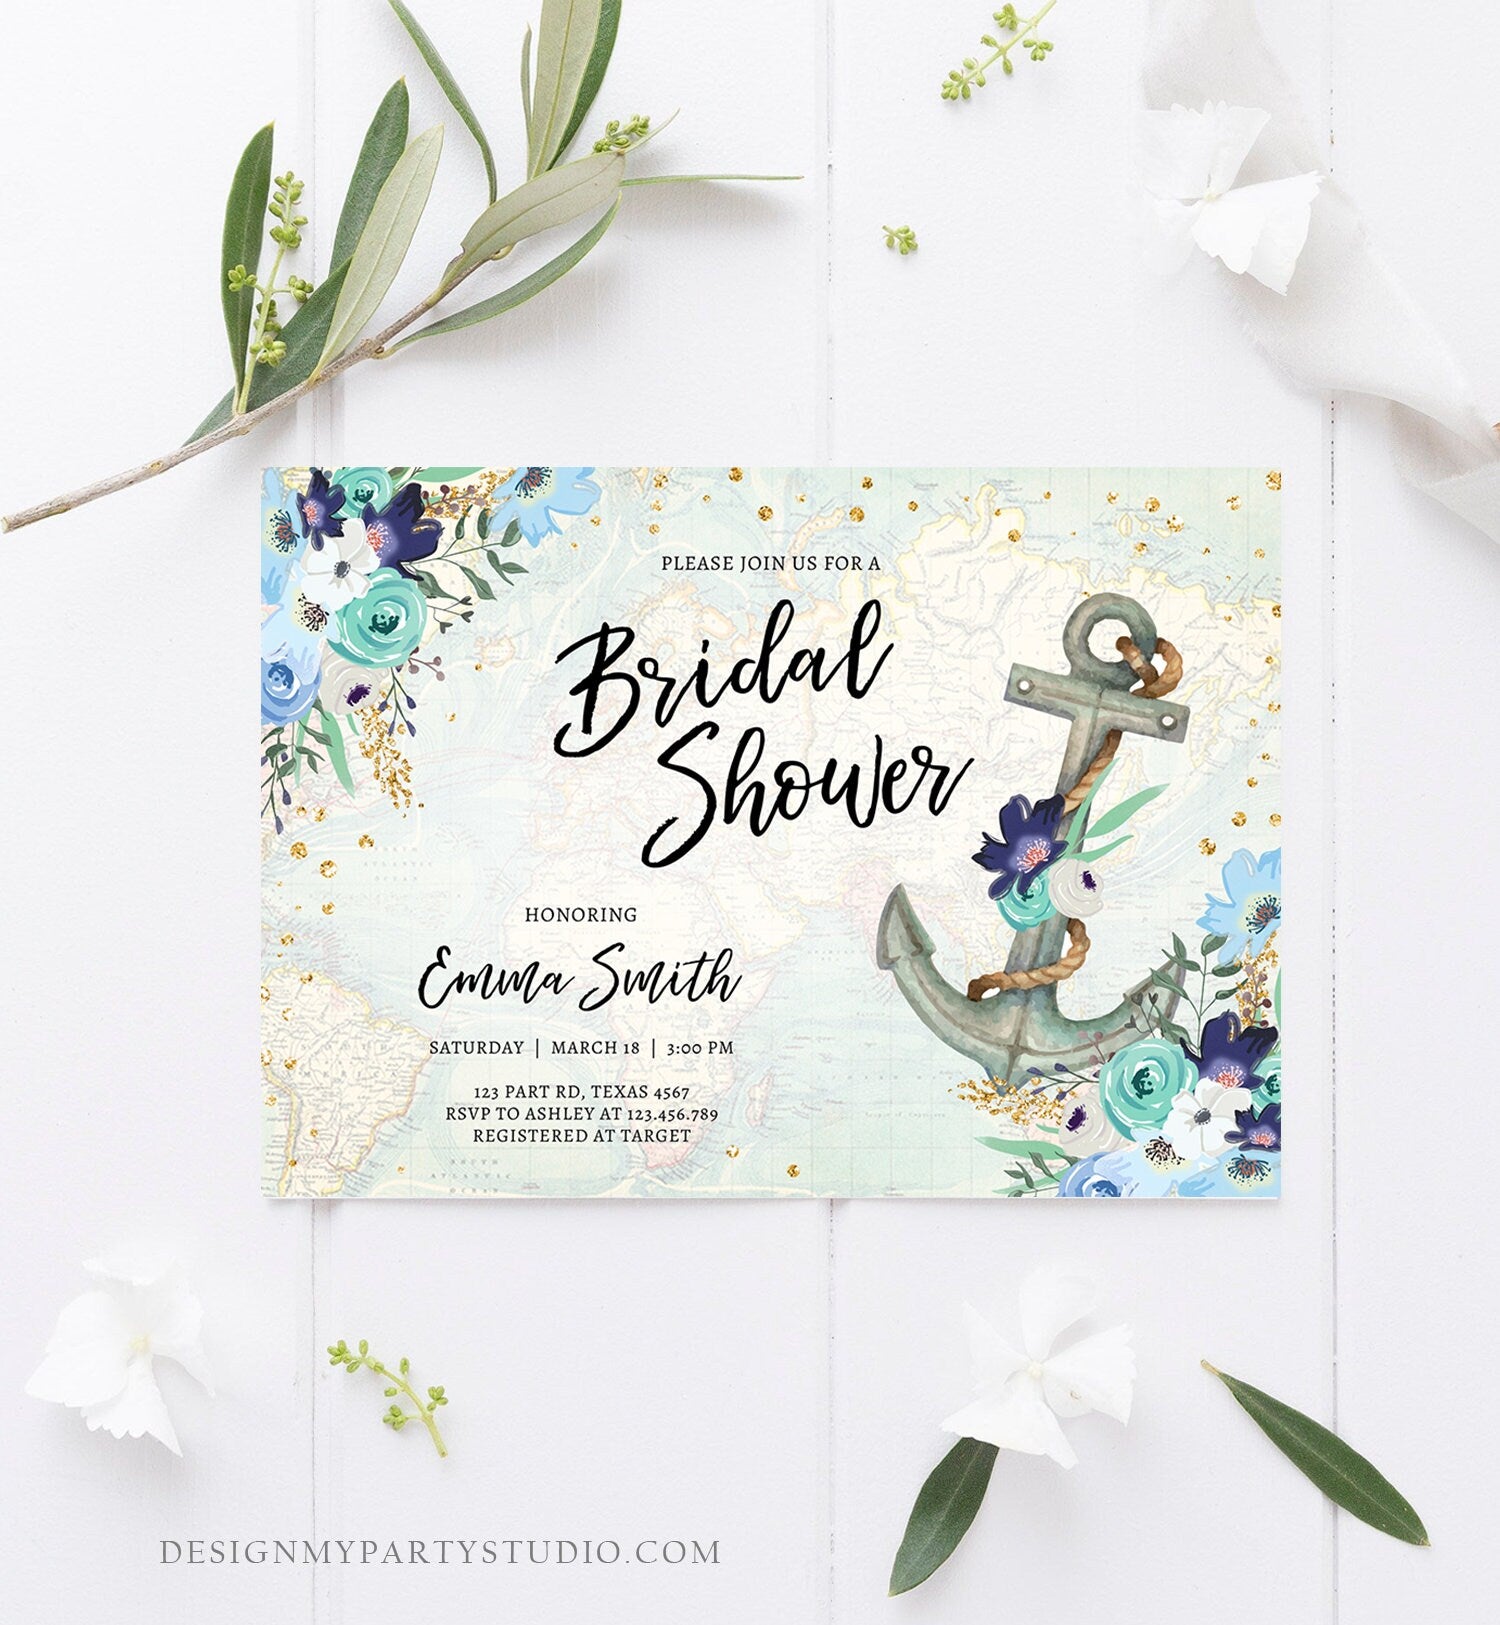 Editable Nautical Bridal Shower Invitation Flowers Floral Anchor Navy Pink Blue Gold Wedding Shower Download Printable Corjl Template 0397